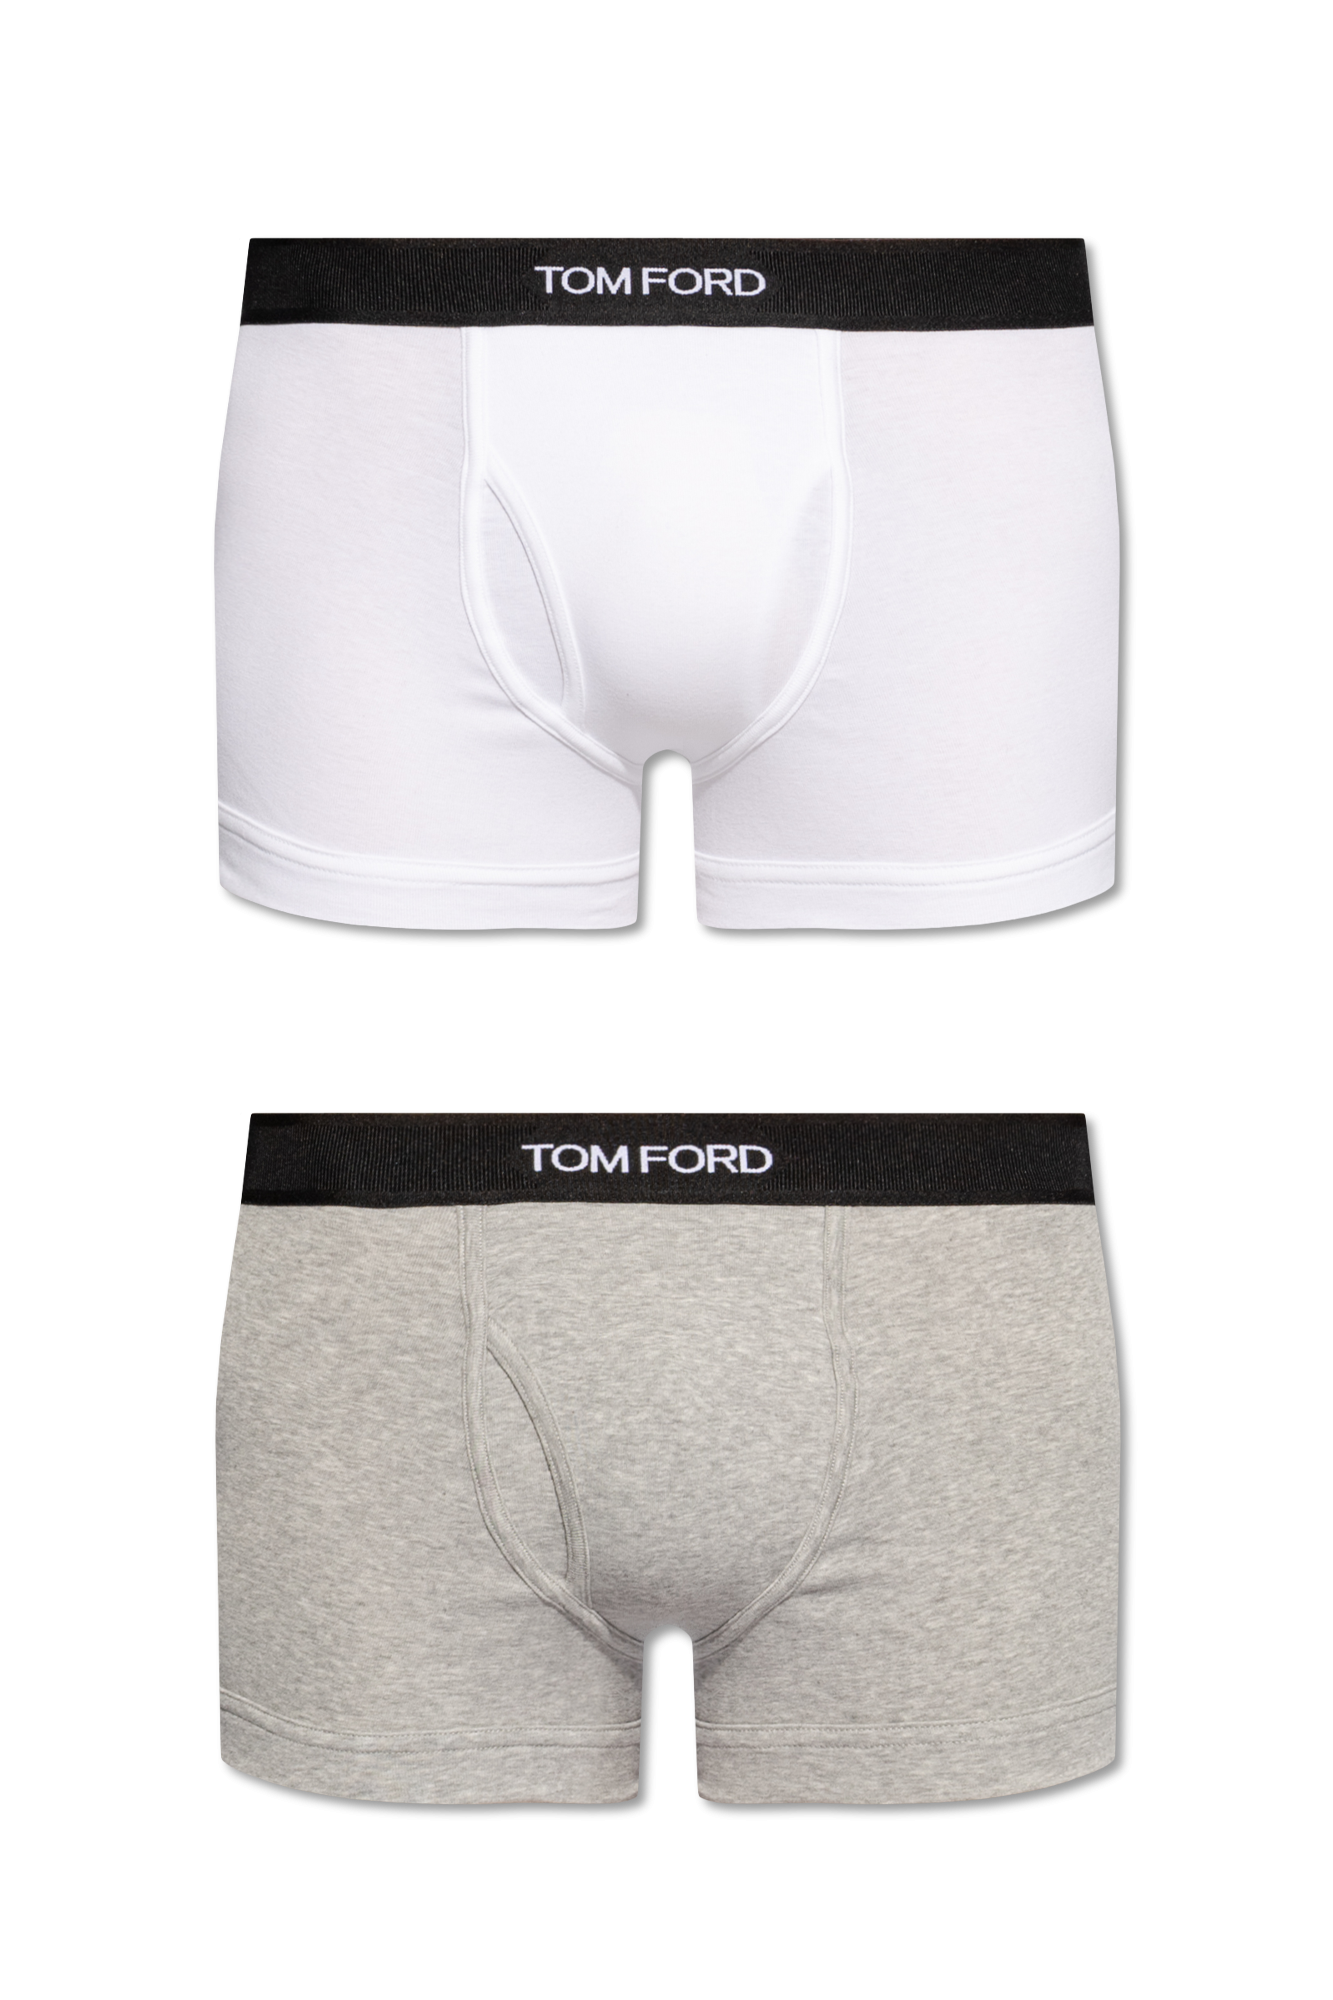 Tom Ford Boxers two-pack